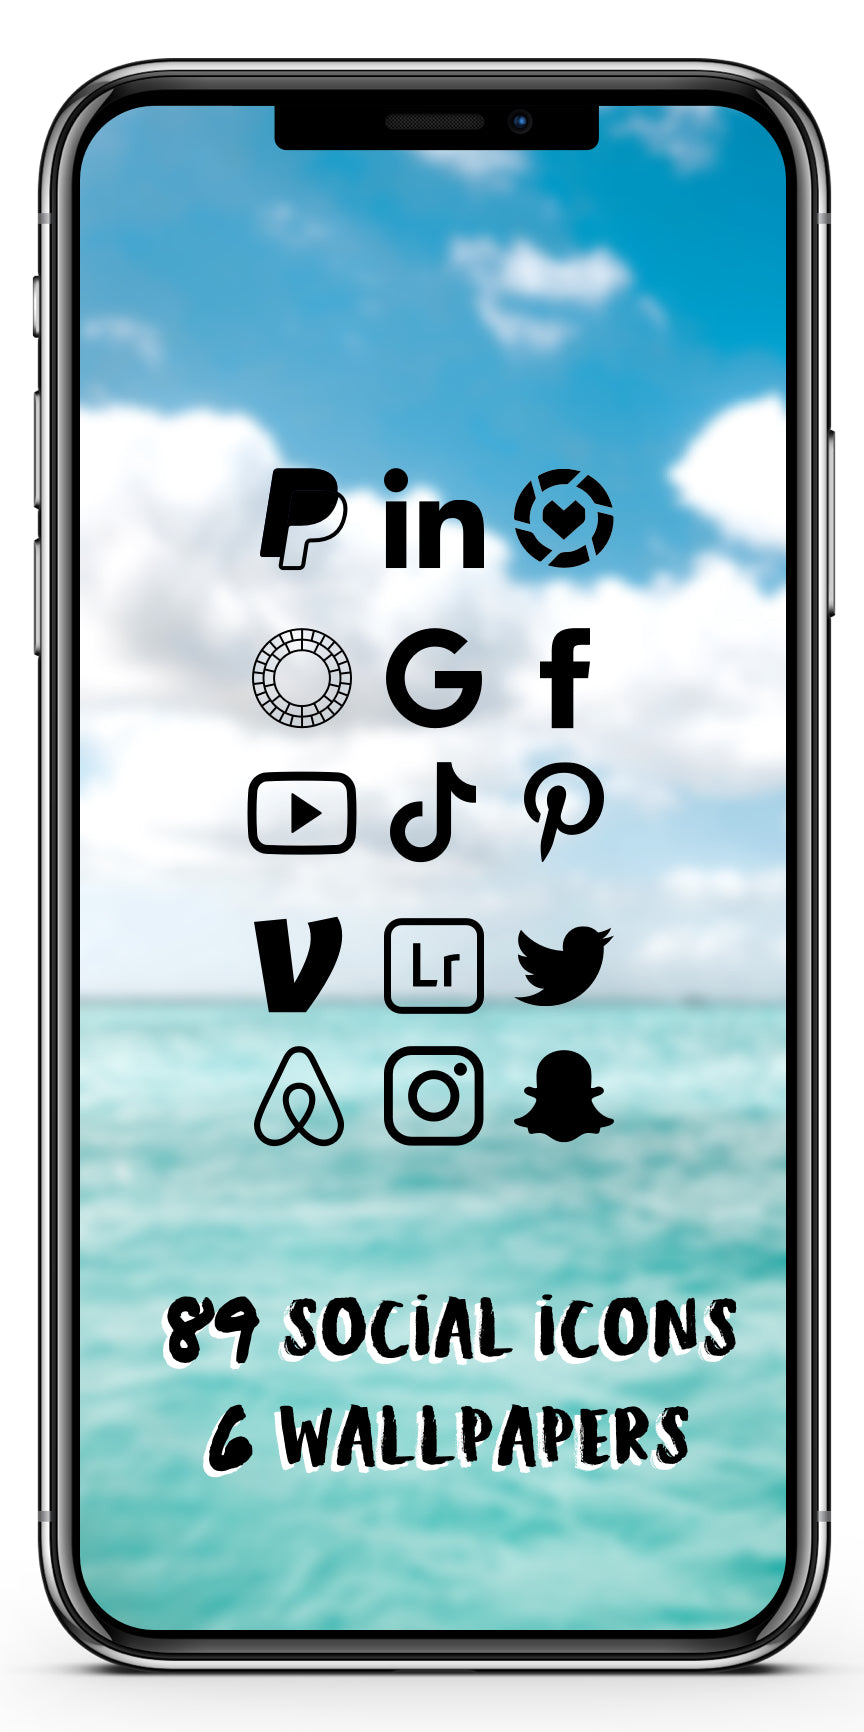 Tropical Icon Theme Social + Wallpaper Expansion Pack iOS14